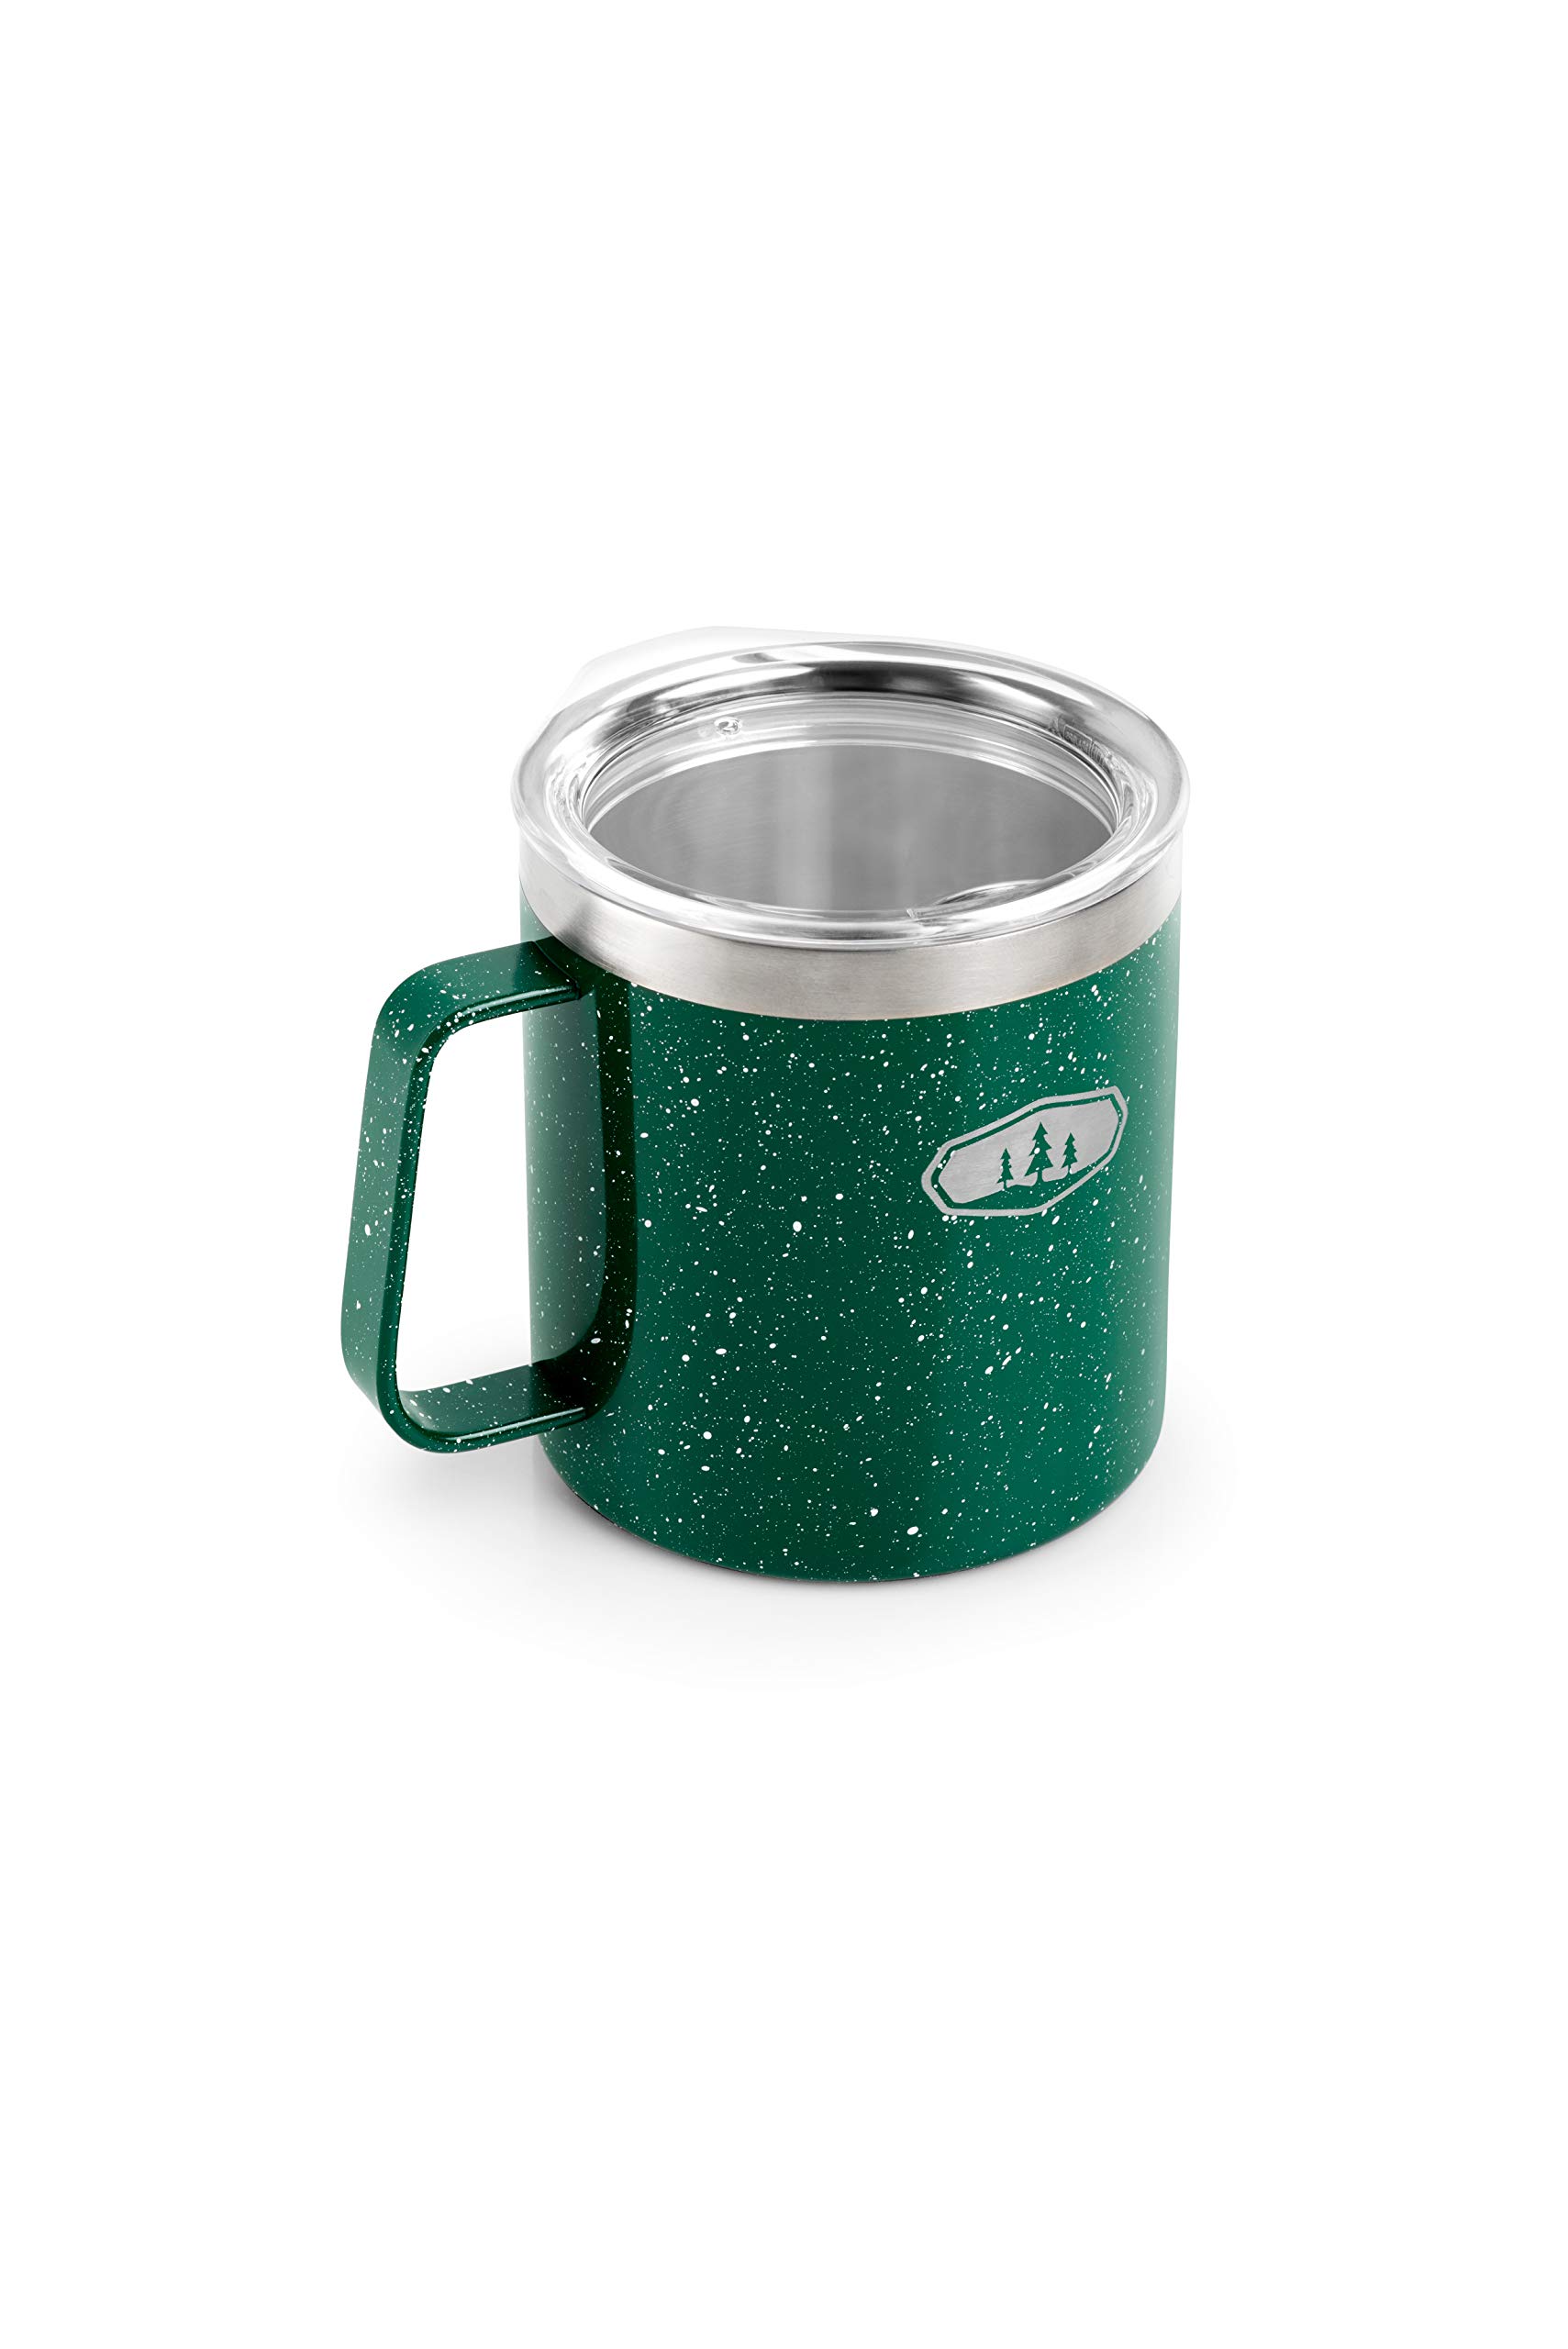 GSI Outdoors Glacier Stainless Camp Cup – 444 ml (Green Speckle)